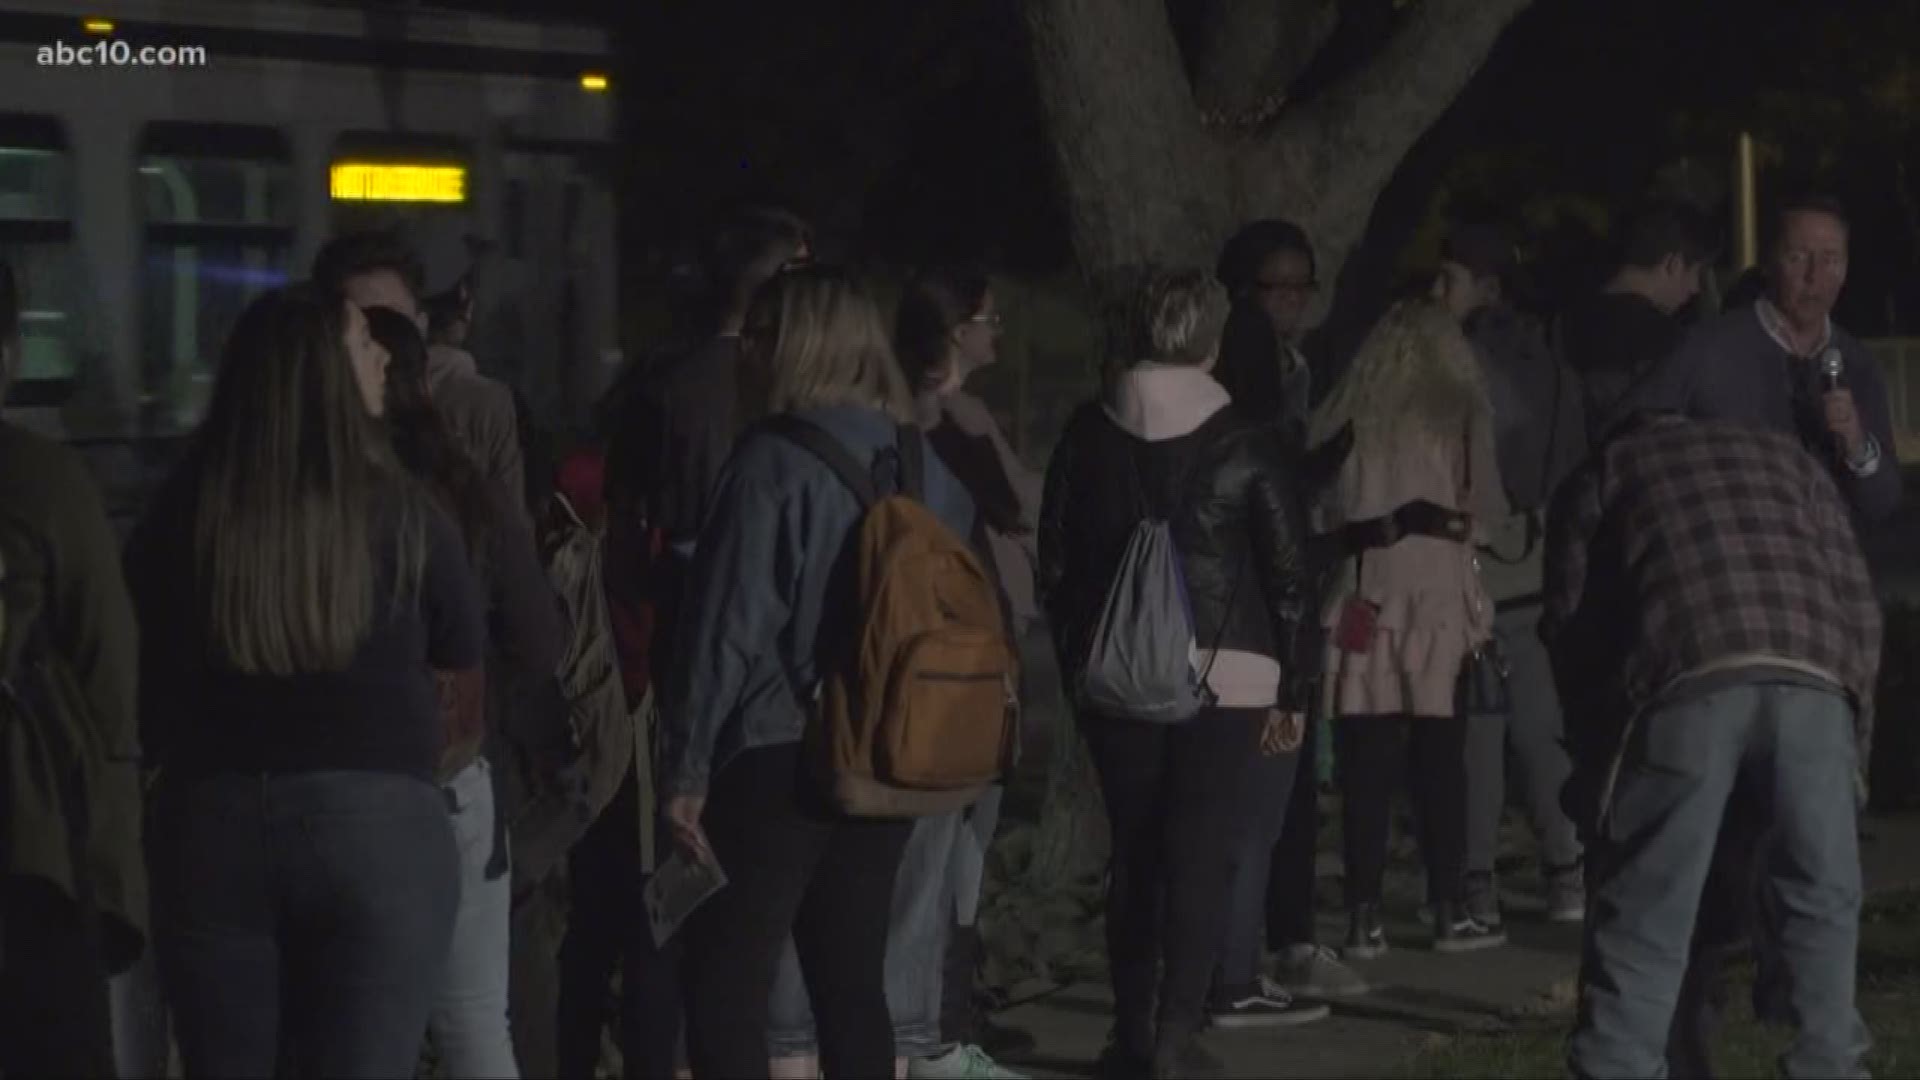 Students waited for hours at a voting center on the campus of Sac State on Election Night.